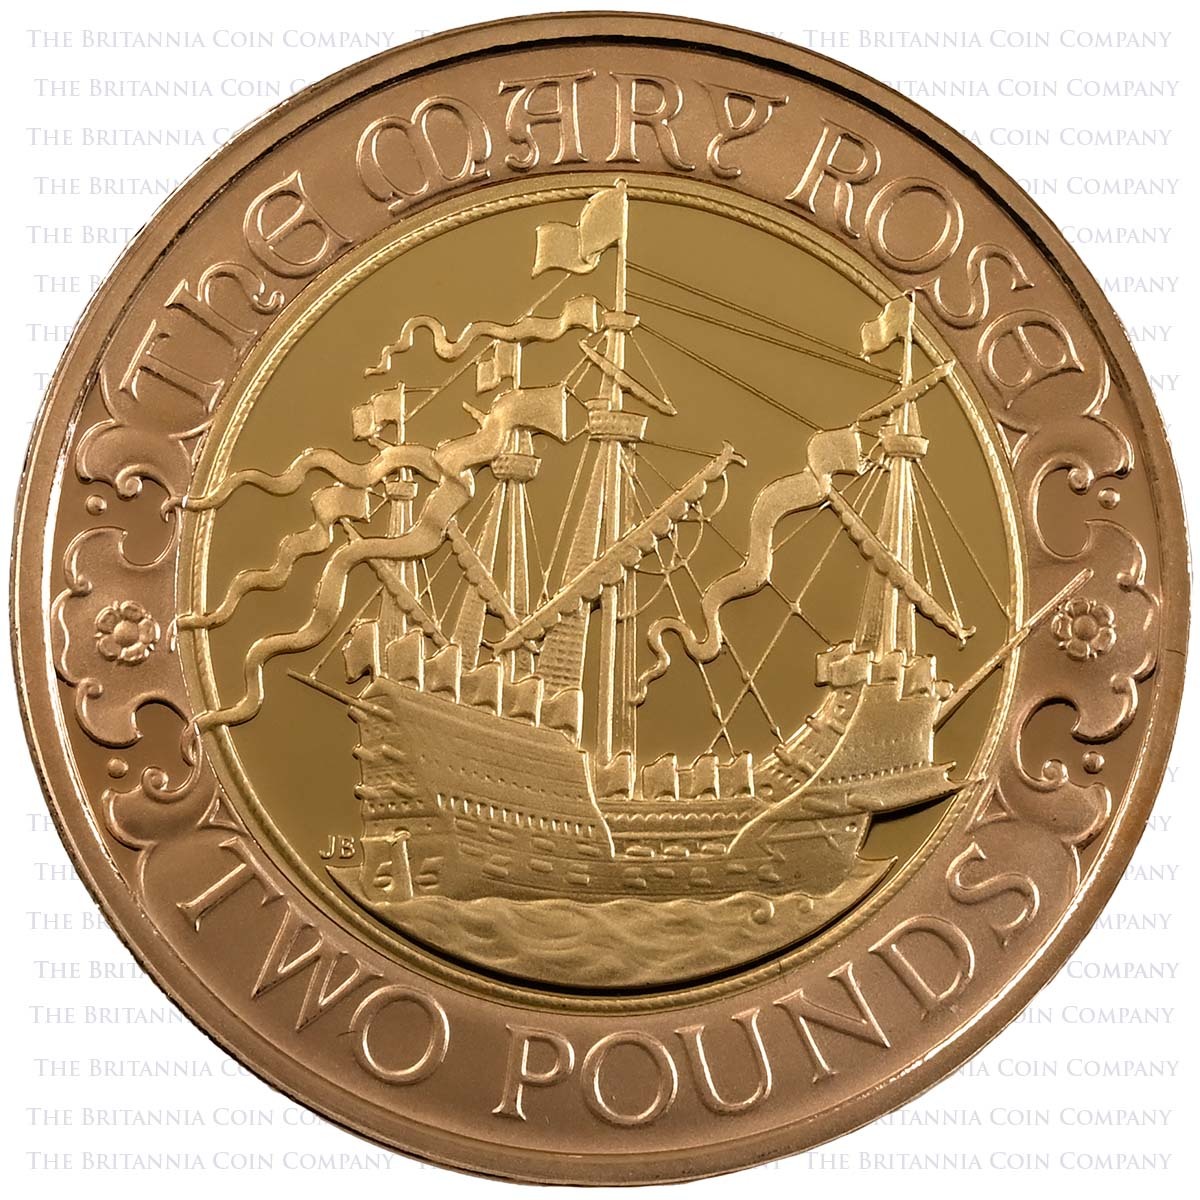 UKMRGP 2011 Mary Rose Two Pound Gold Proof Coin Reverse